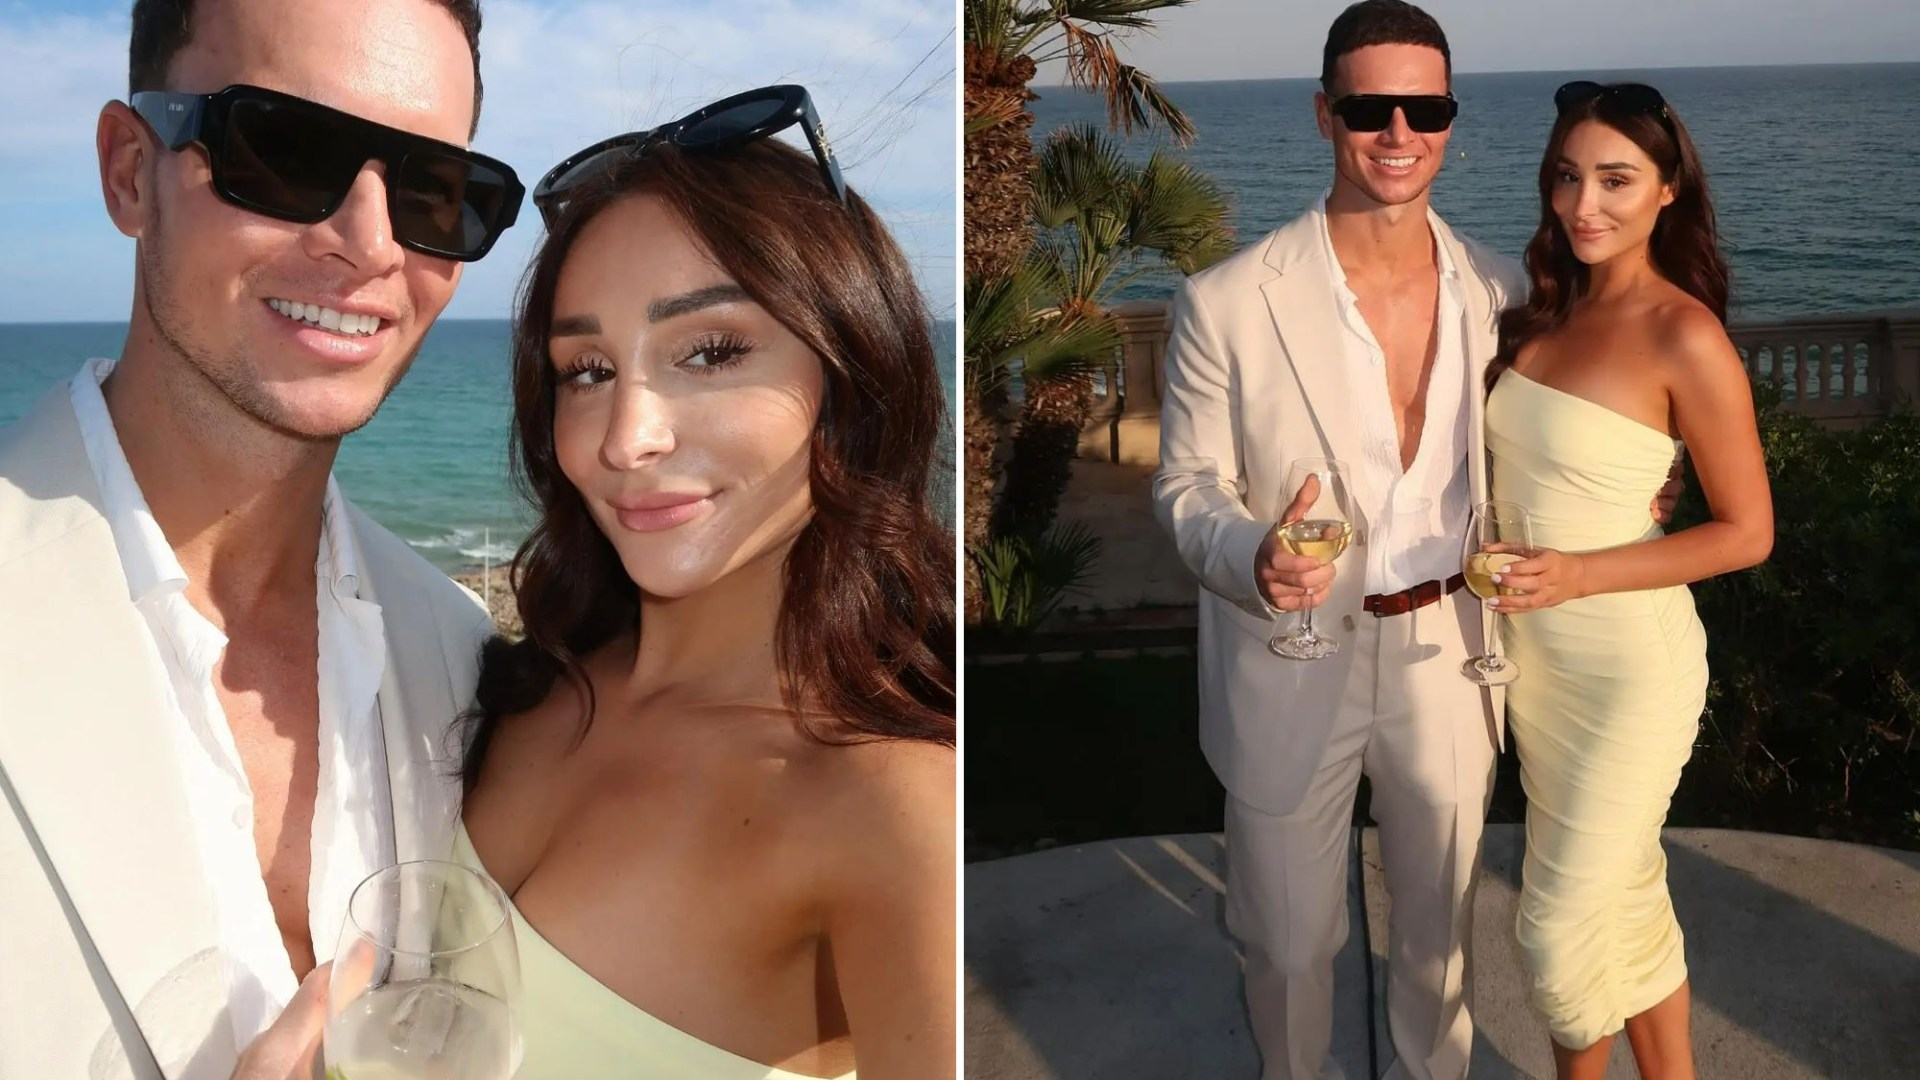 Love Islands Coco Lodge and DJ boyfriend Joel Corry spark engagement rumours with cryptic comments on sweet snap [Video]